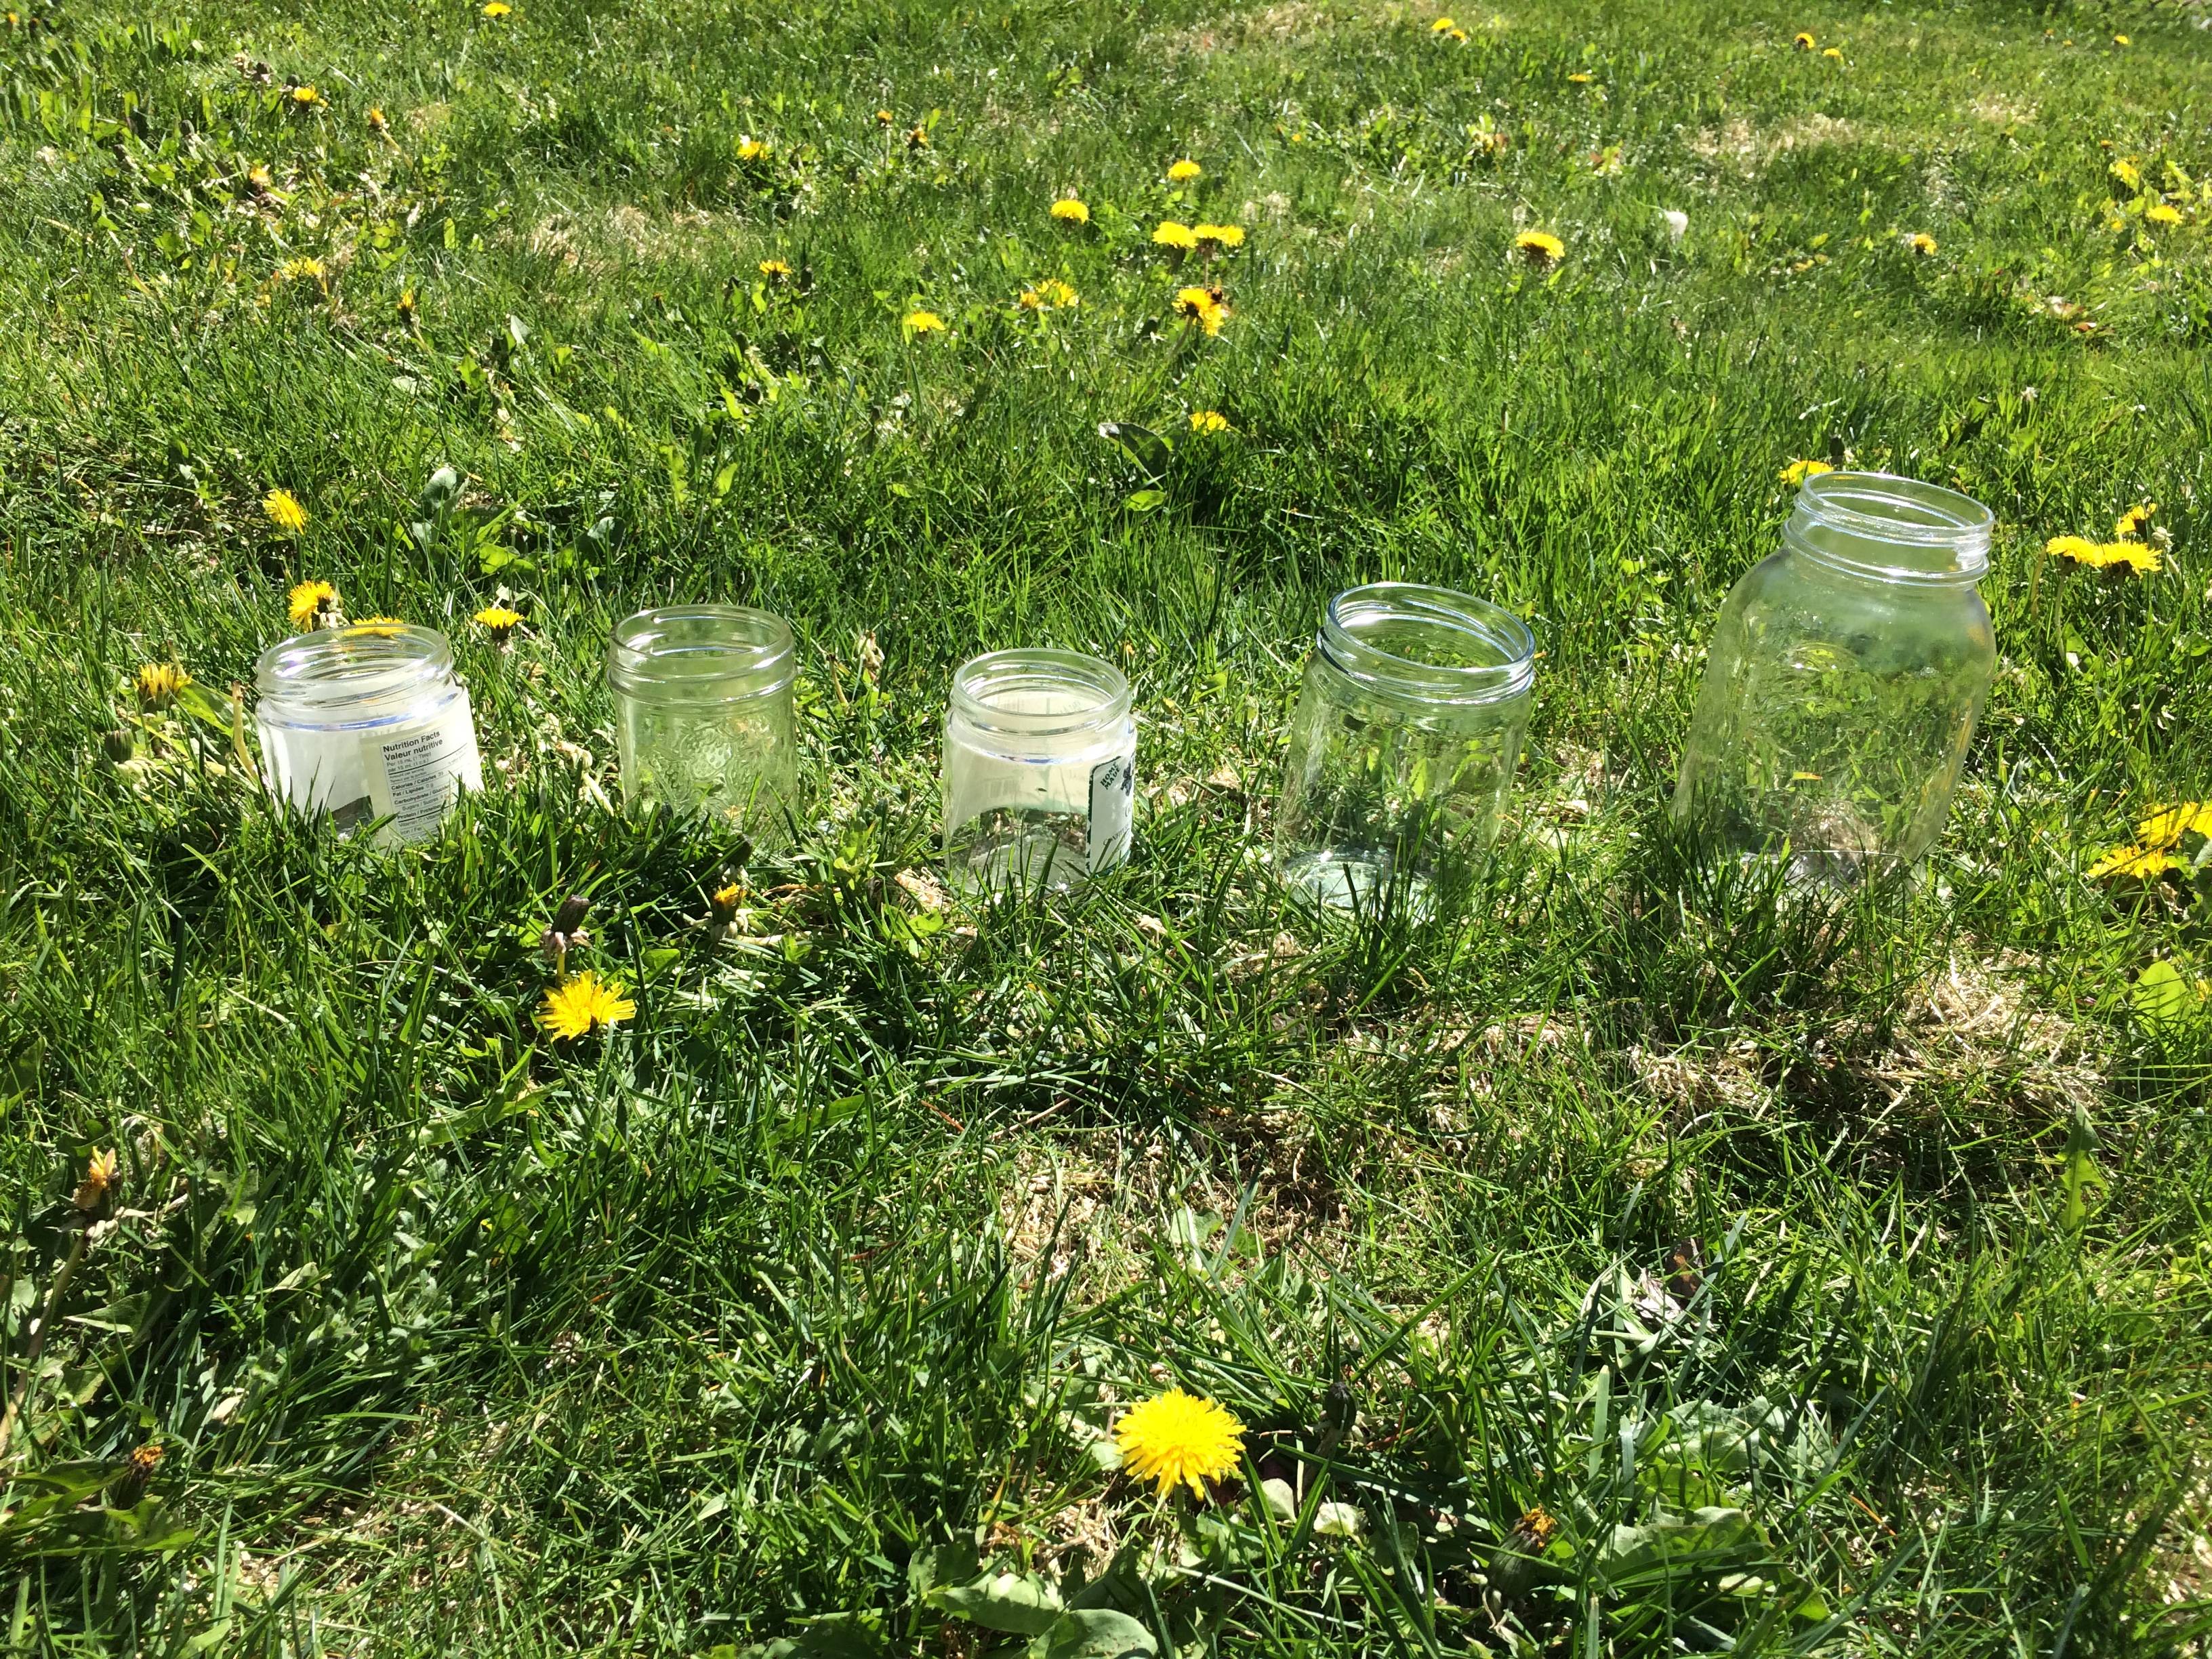 empty glass jars laid out on grass